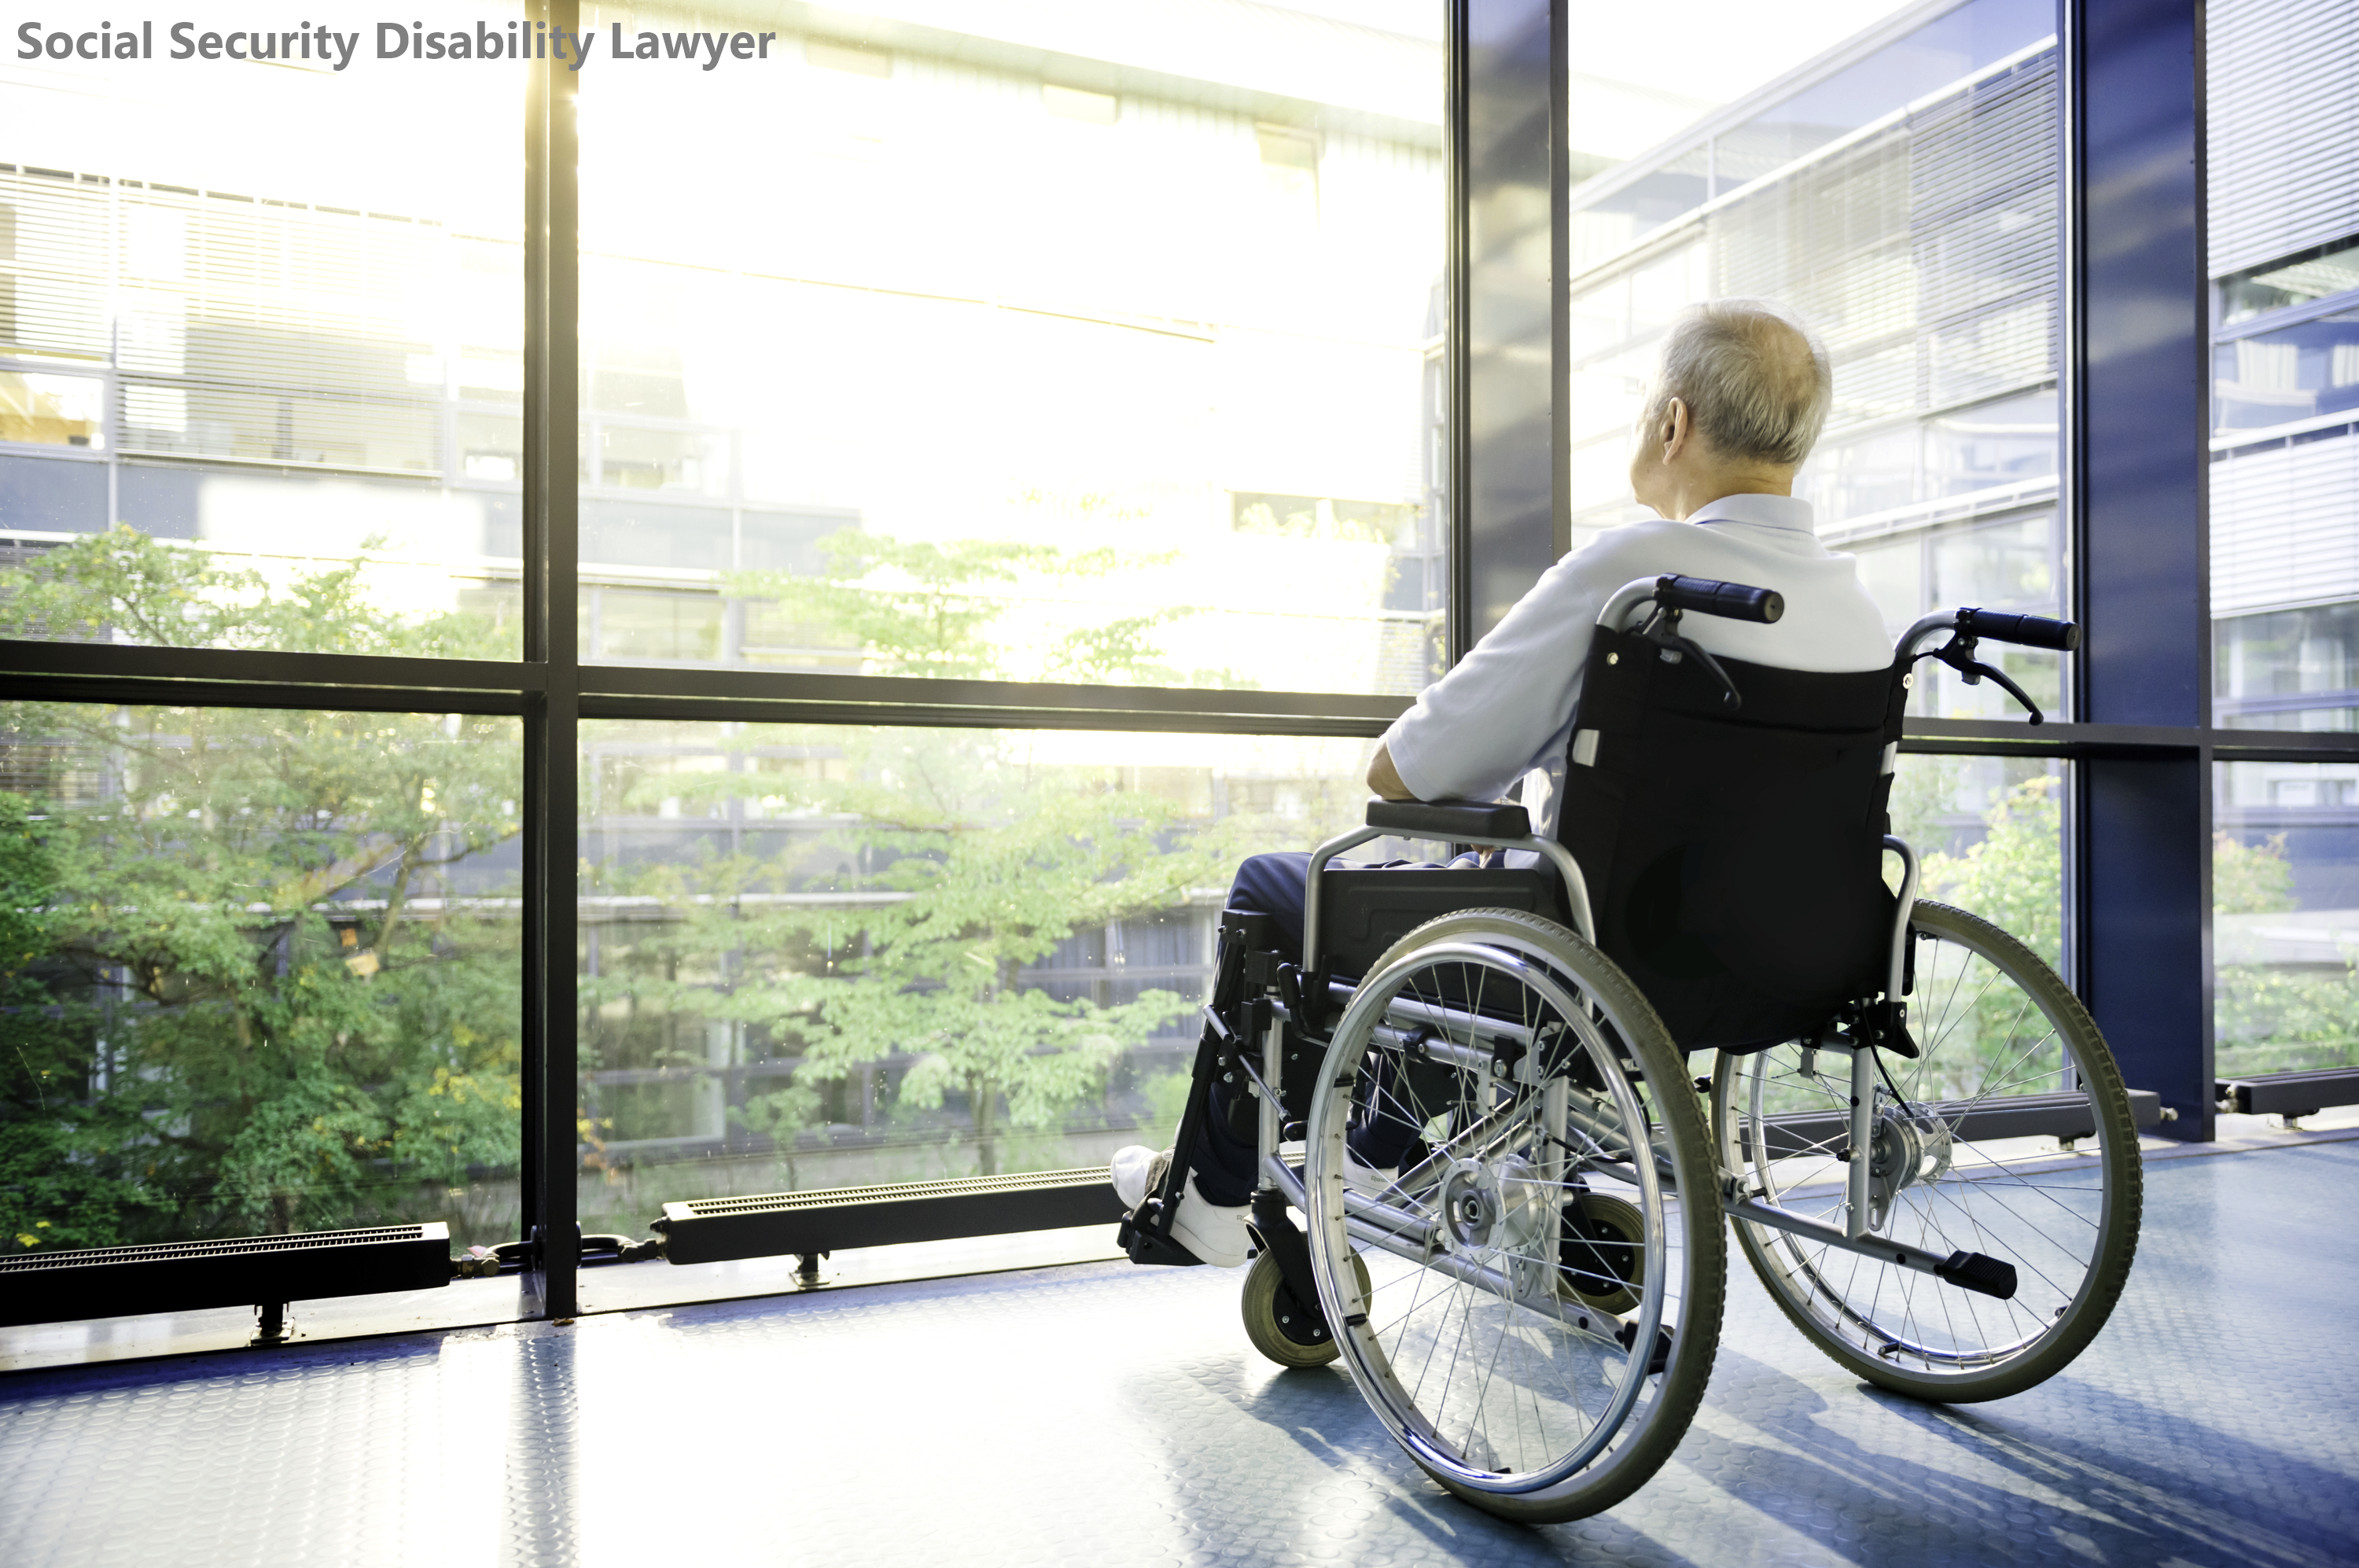 What Is the Social Security Disability Lawyer